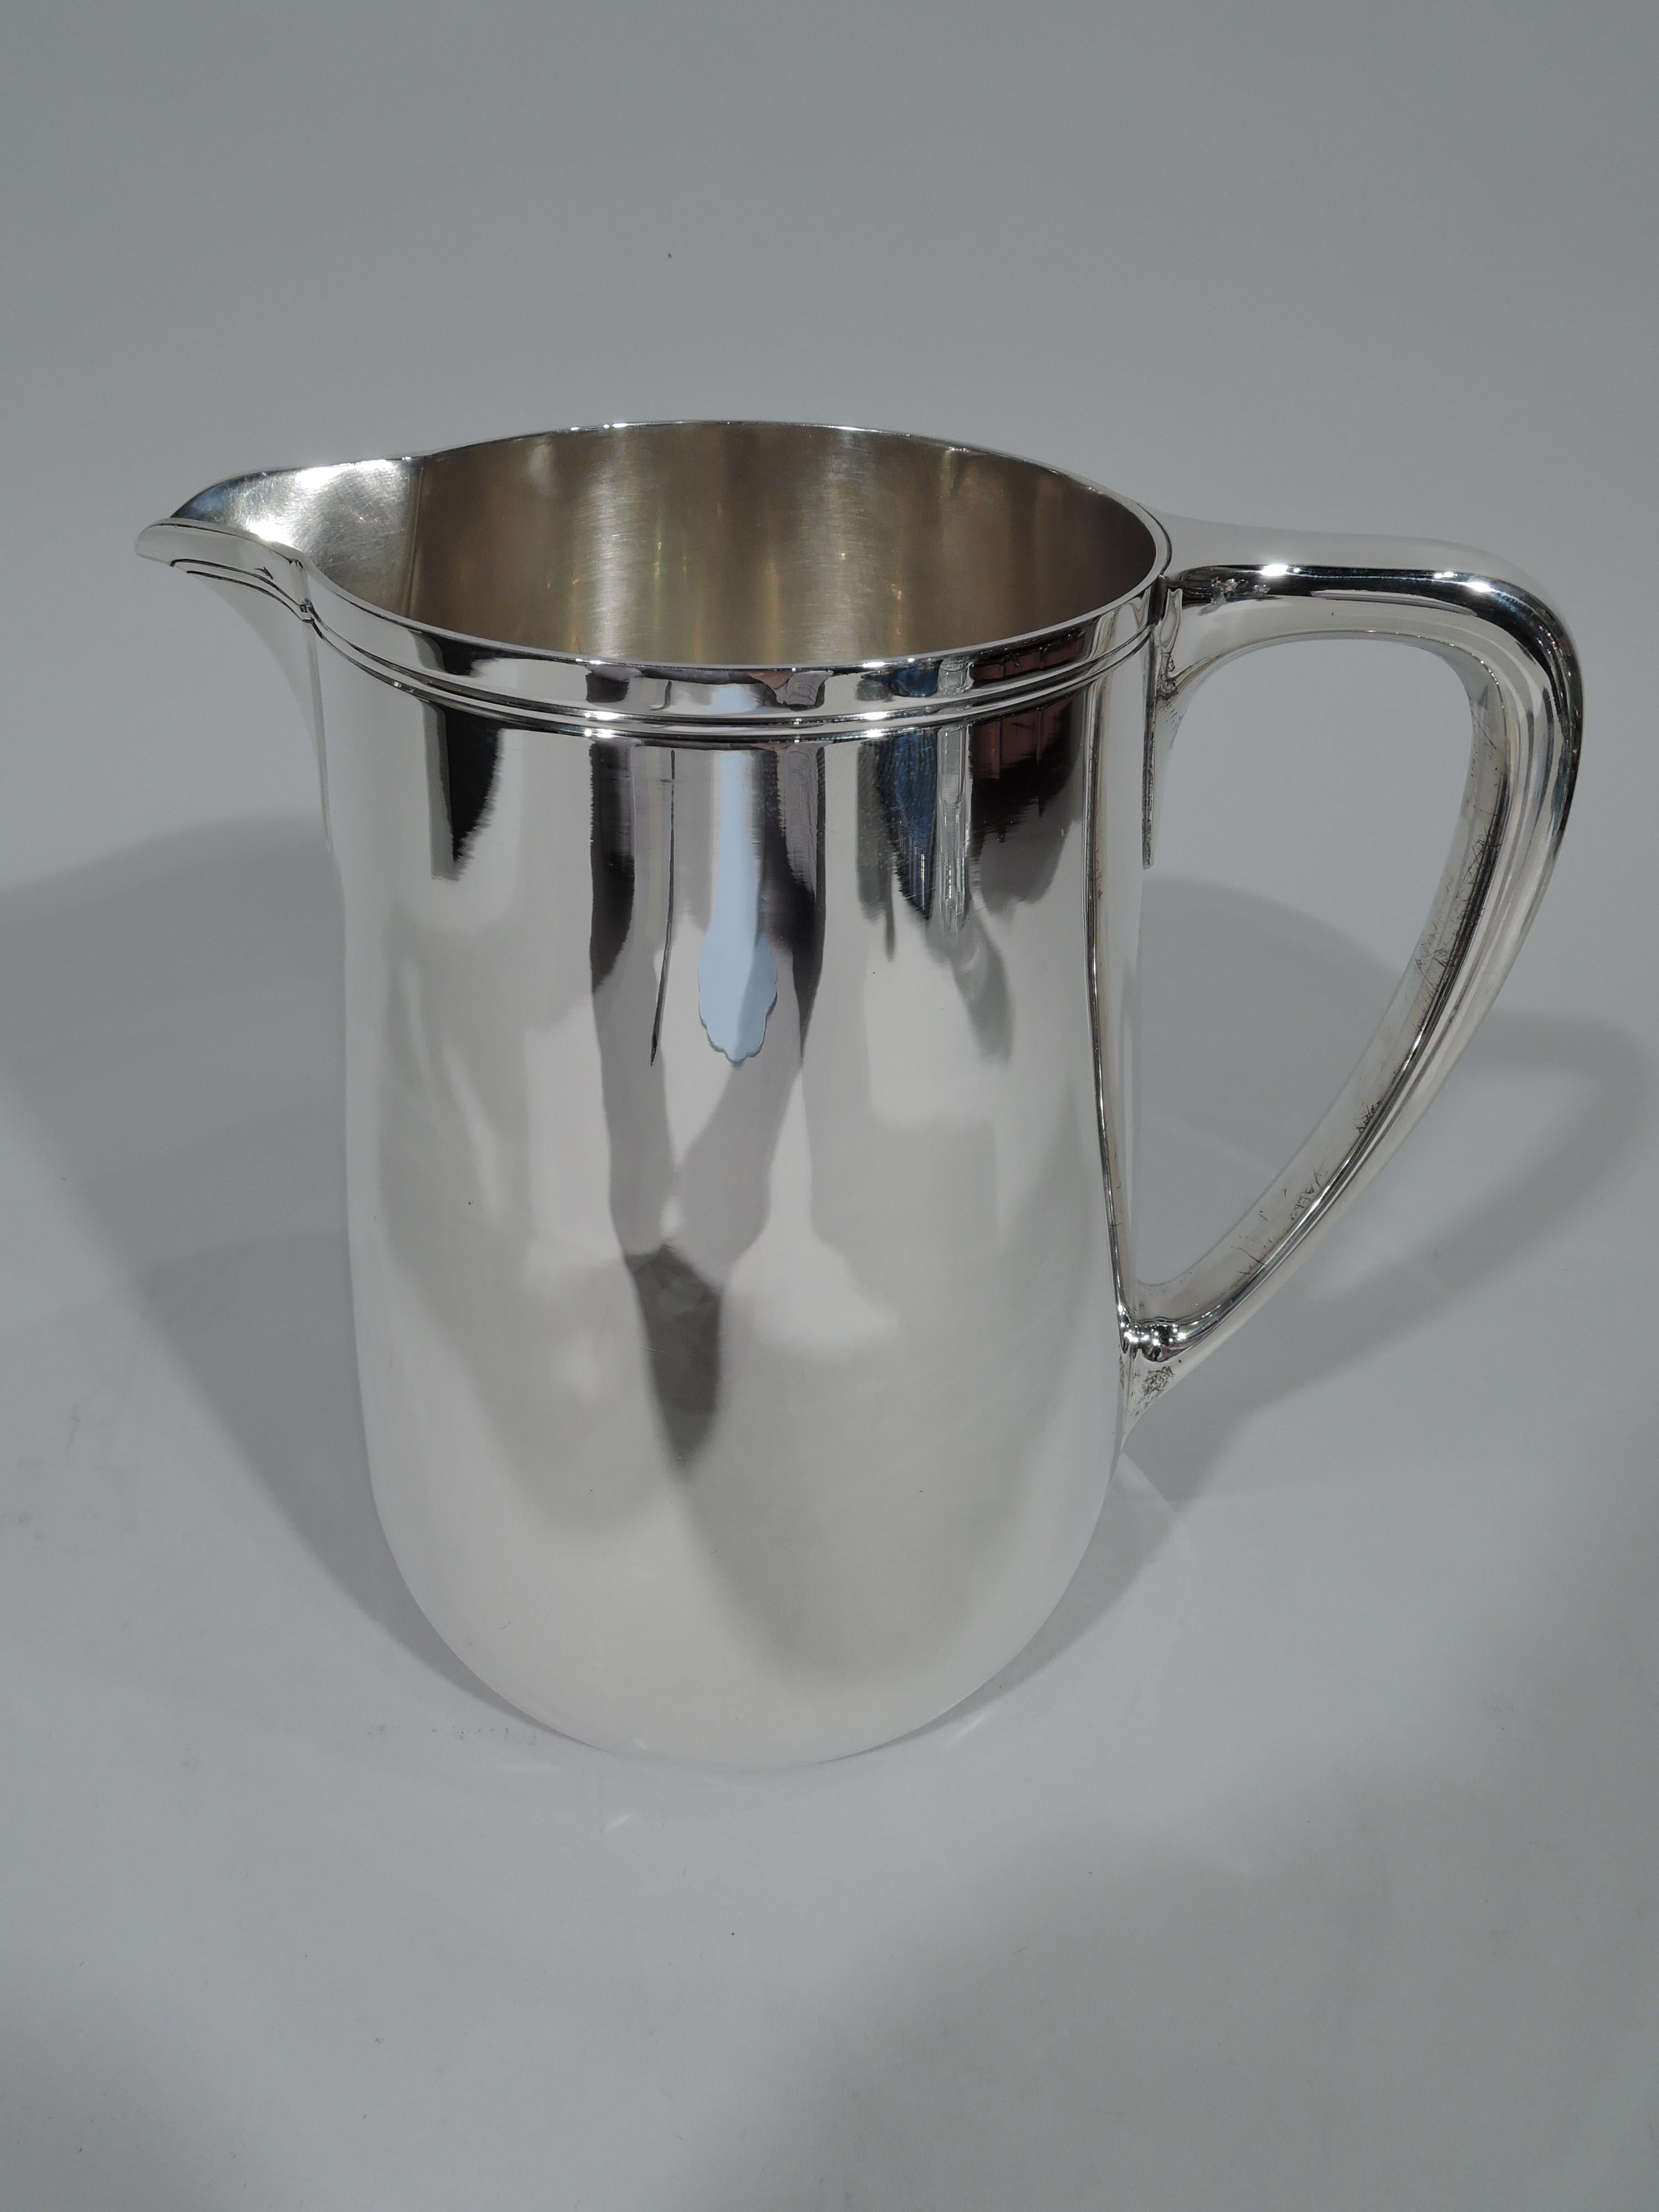 Modern sterling silver water pitcher. Made by Tiffany & Co. in New York. Upward tapering sides, scrolled bracket handle, and v-spout. Spare incised banding near rim. Holds 3 1/2 pints. Hallmark includes pattern no. 22343, director's letter m